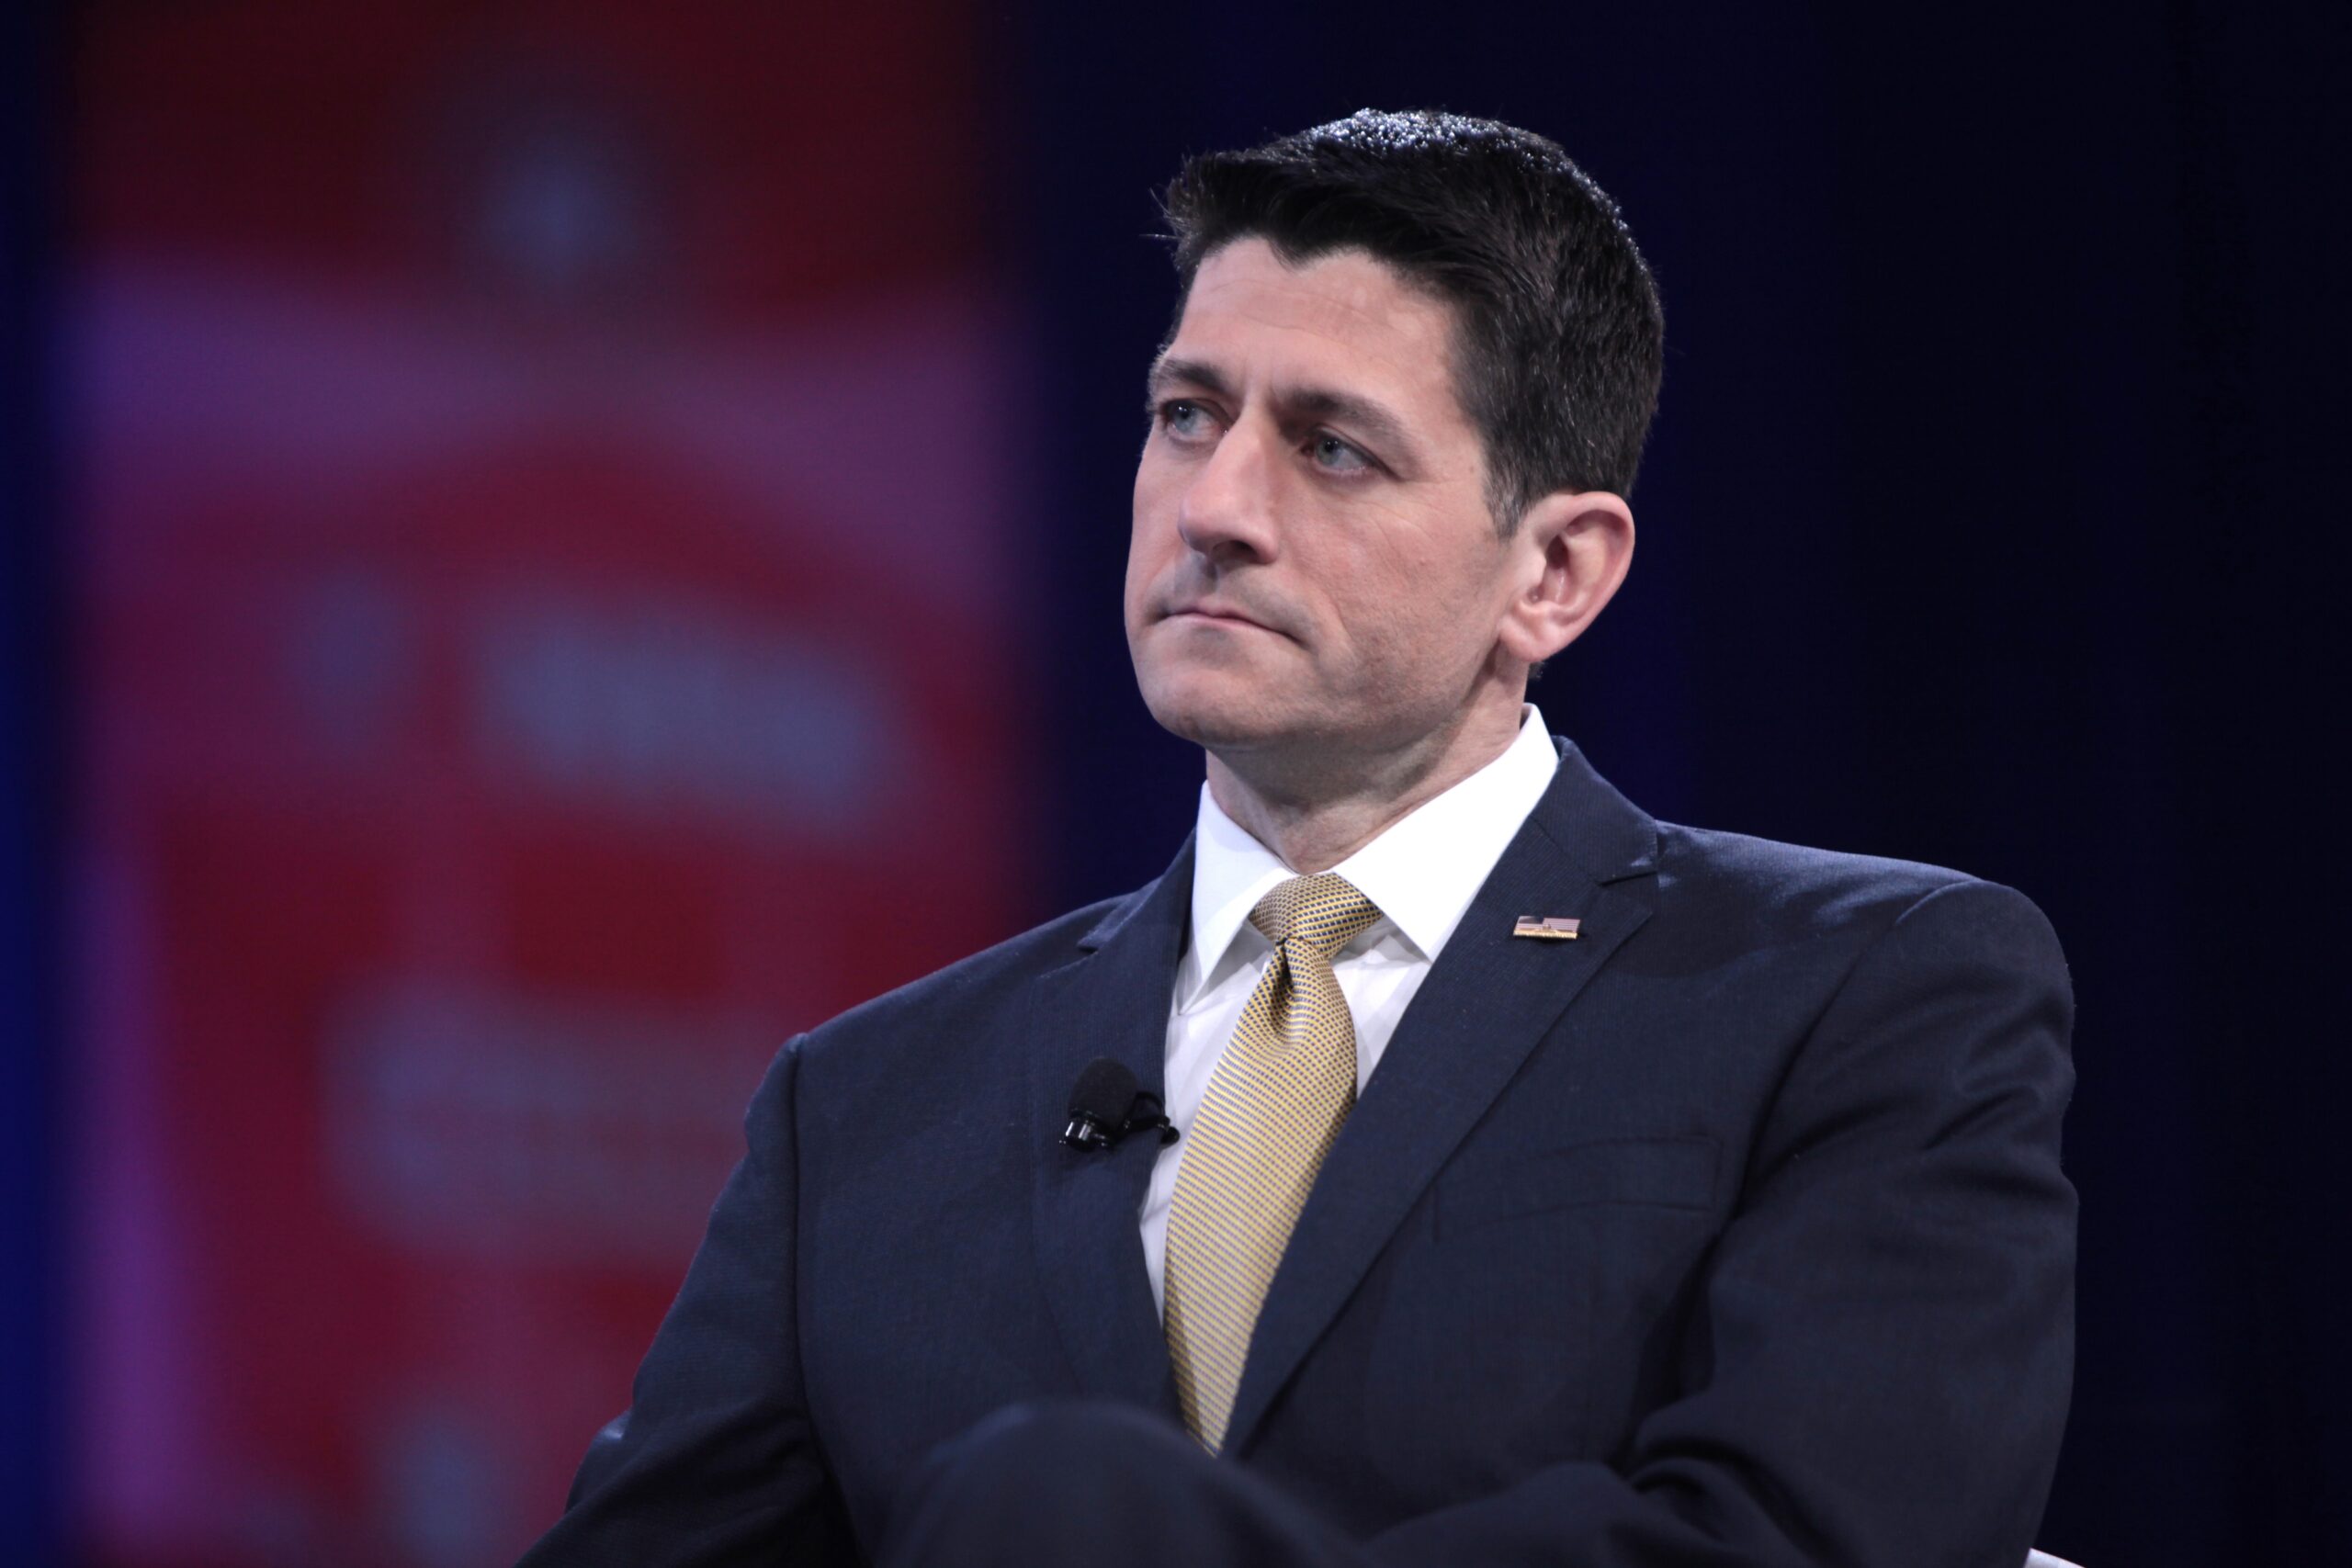 Ryan Cites Need For ‘Redemption’ In Renewed Push For Criminal Justice Reform